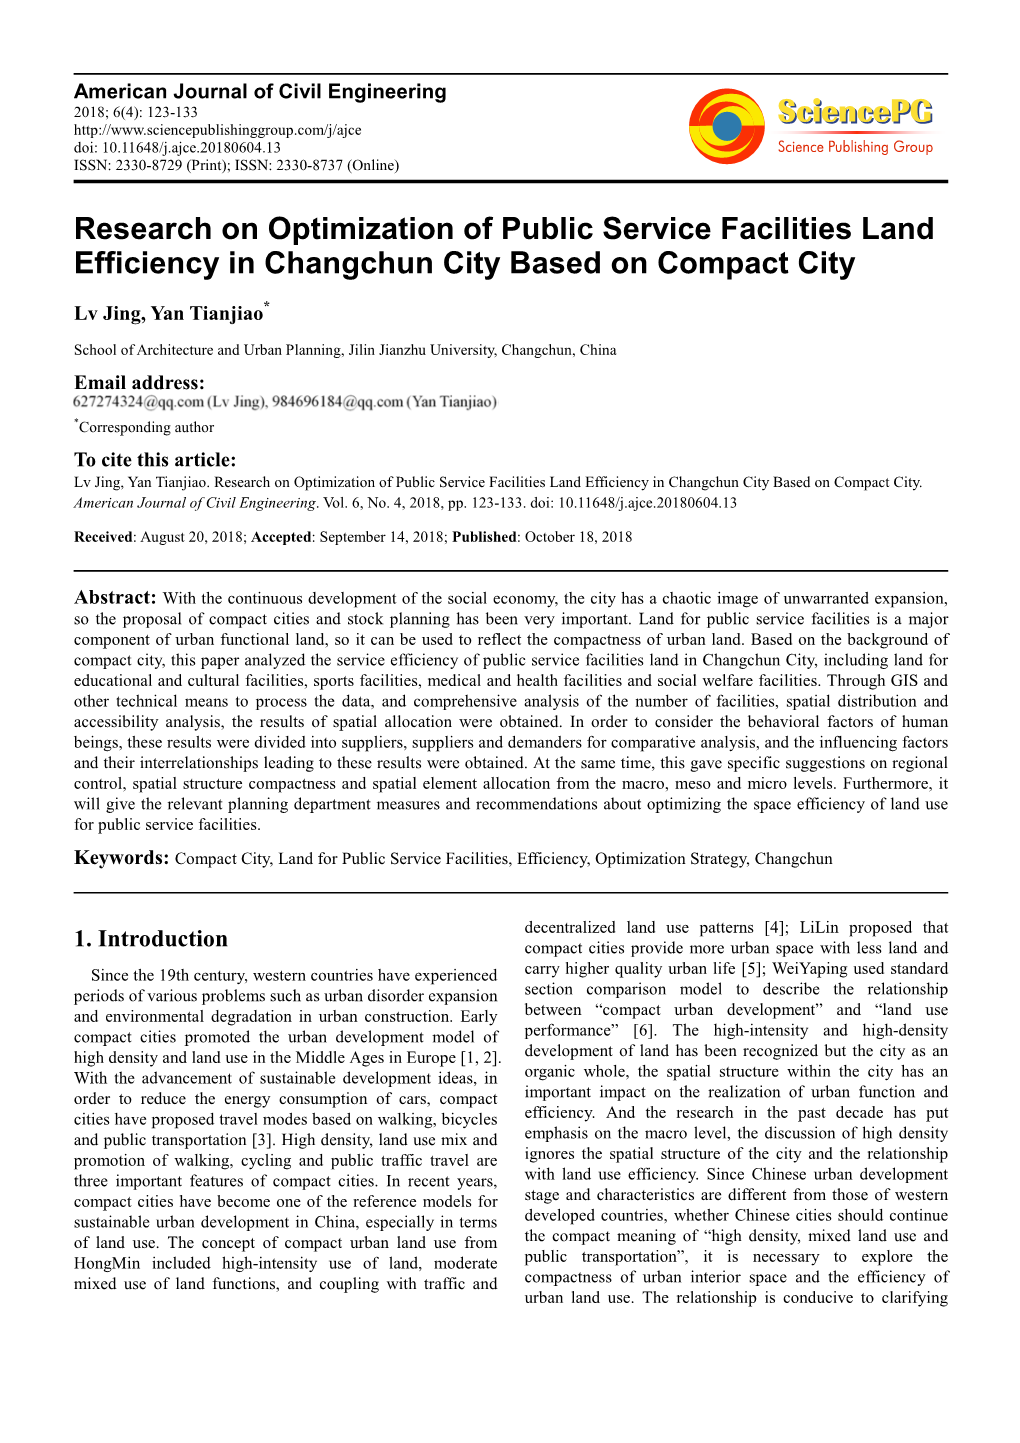 Research on Optimization of Public Service Facilities Land Efficiency in Changchun City Based on Compact City